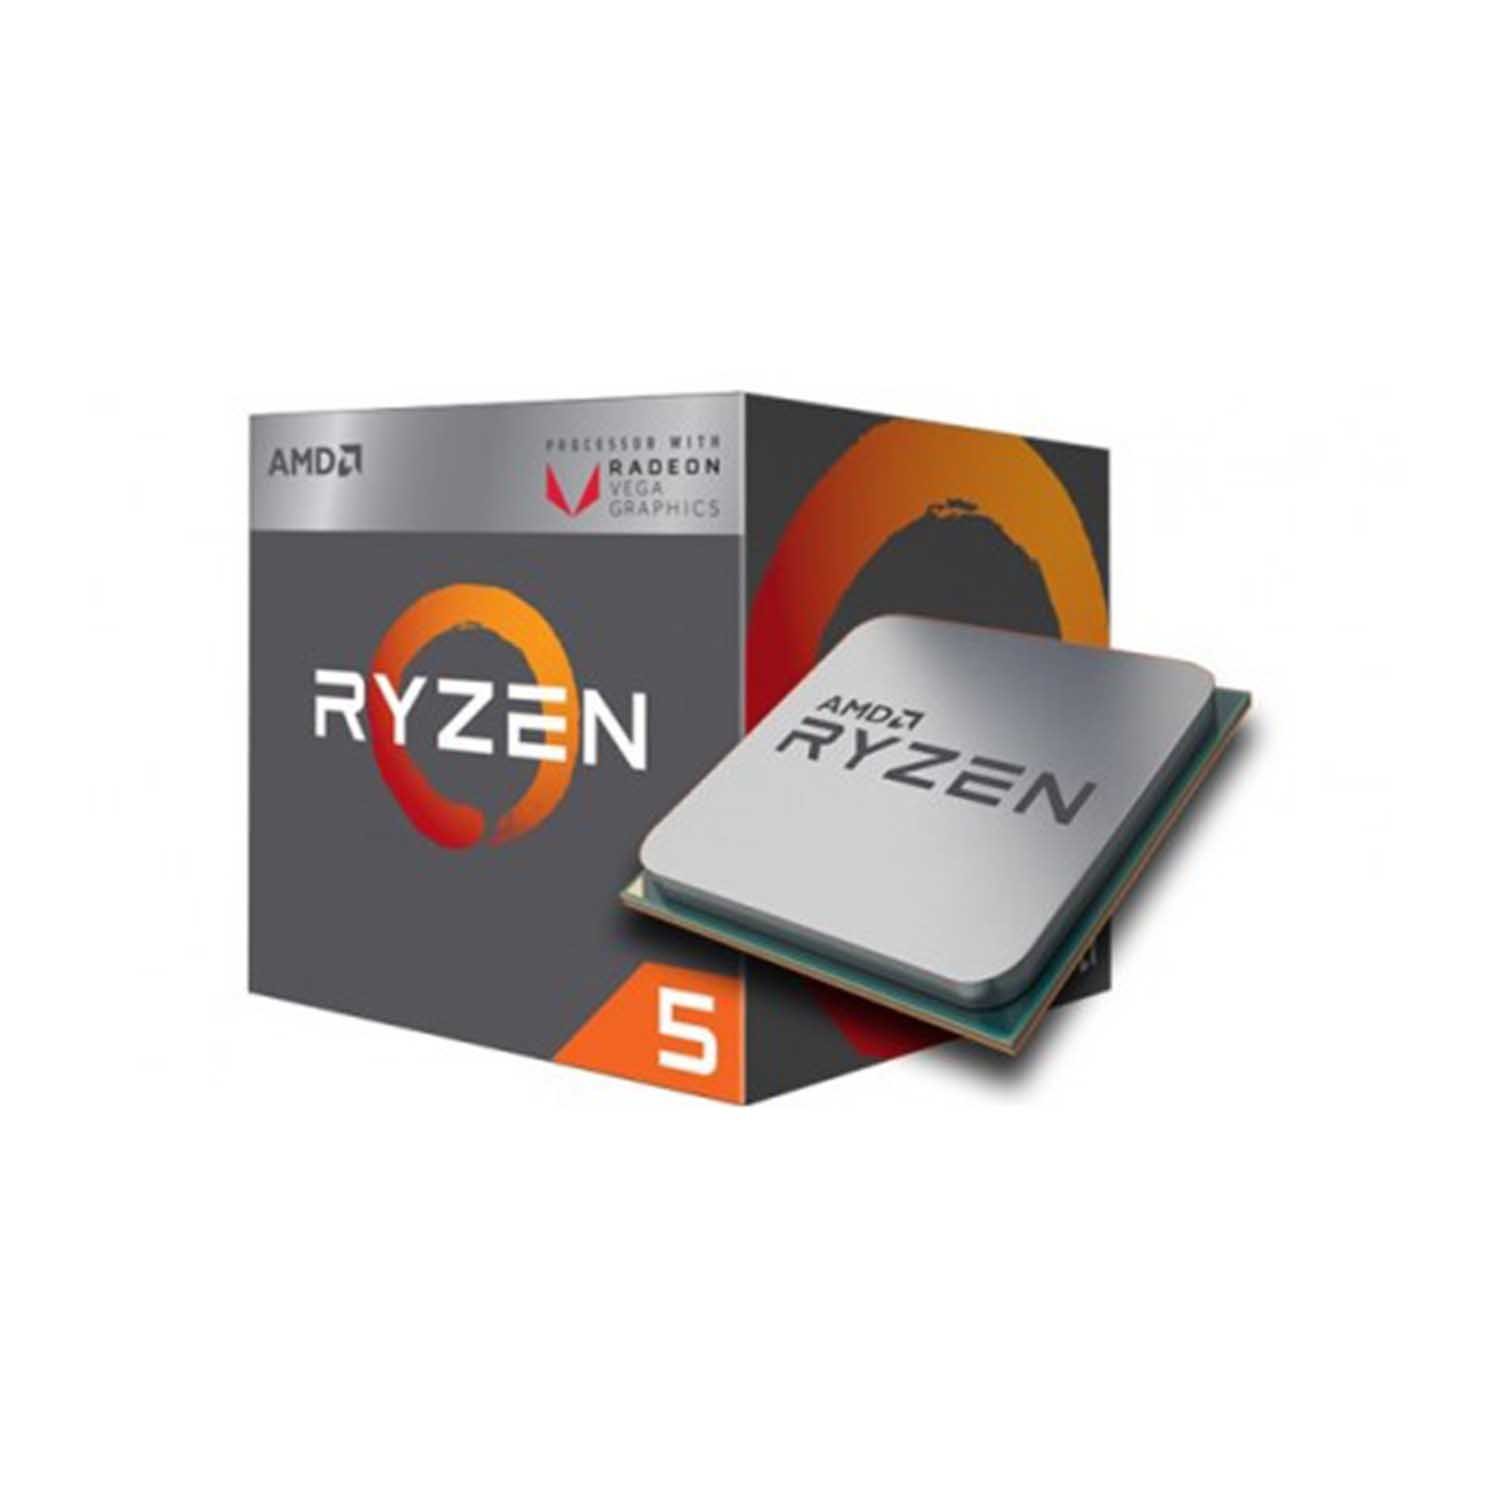 More information about "RYZEN 5 2400g"